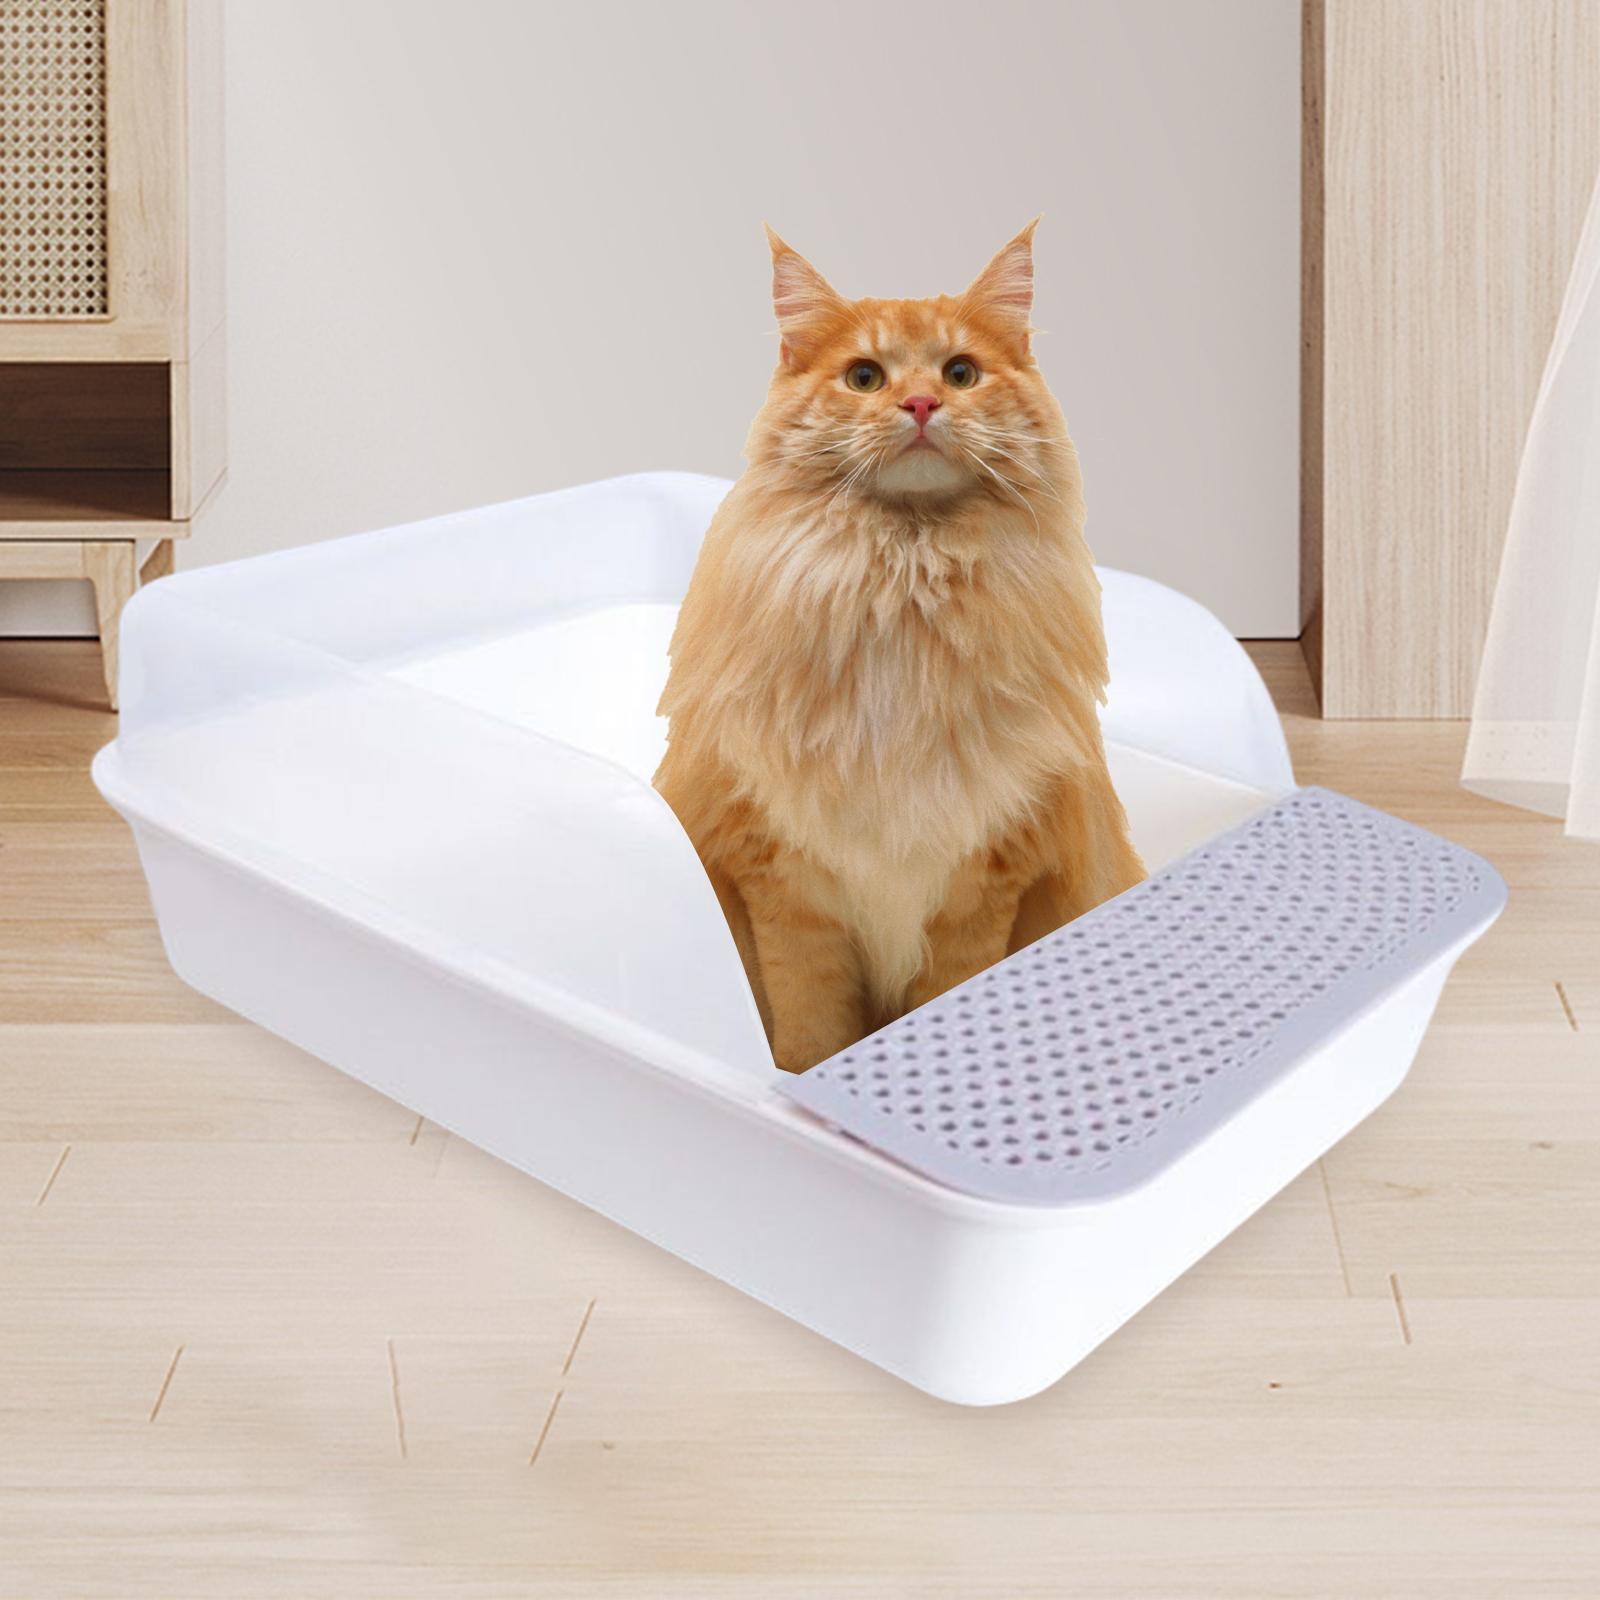 Open  Tray Sturdy Sandbox for Rabbit Indoor Cats Cats Supplies